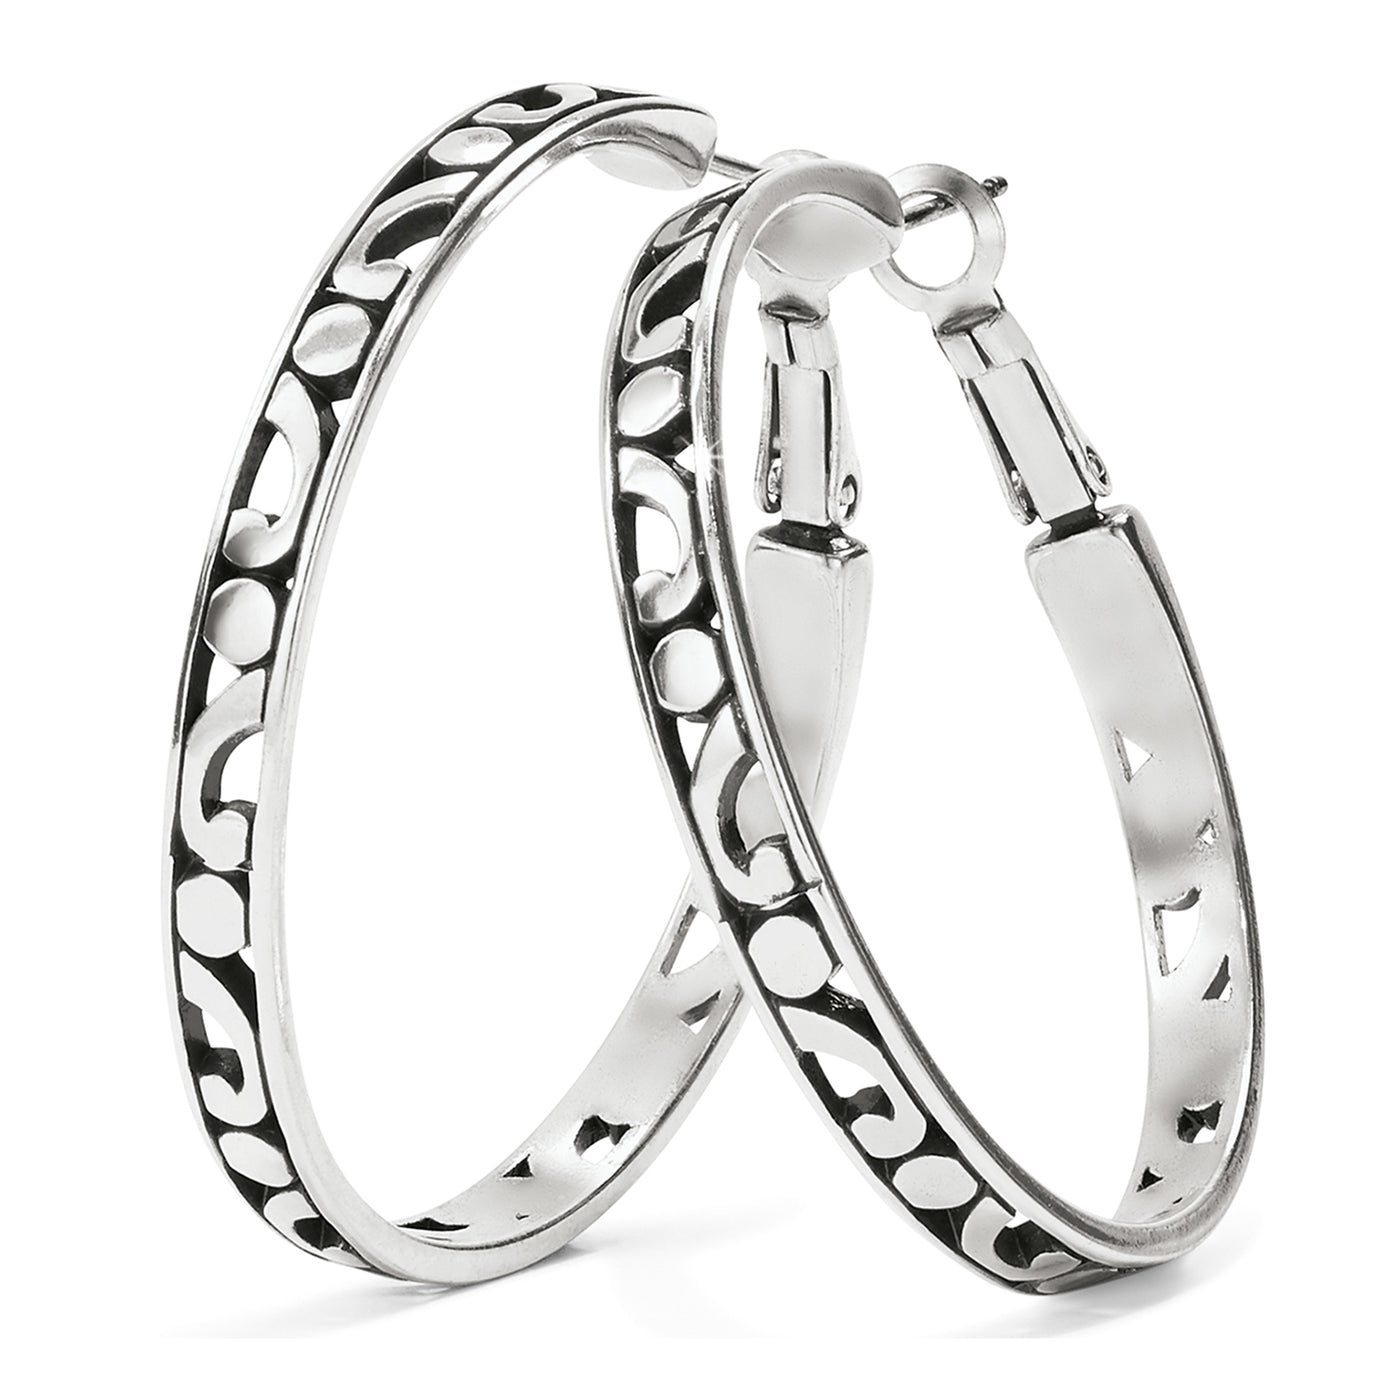 CONTEMPO LARGE HOOP EARRINGS SILVER